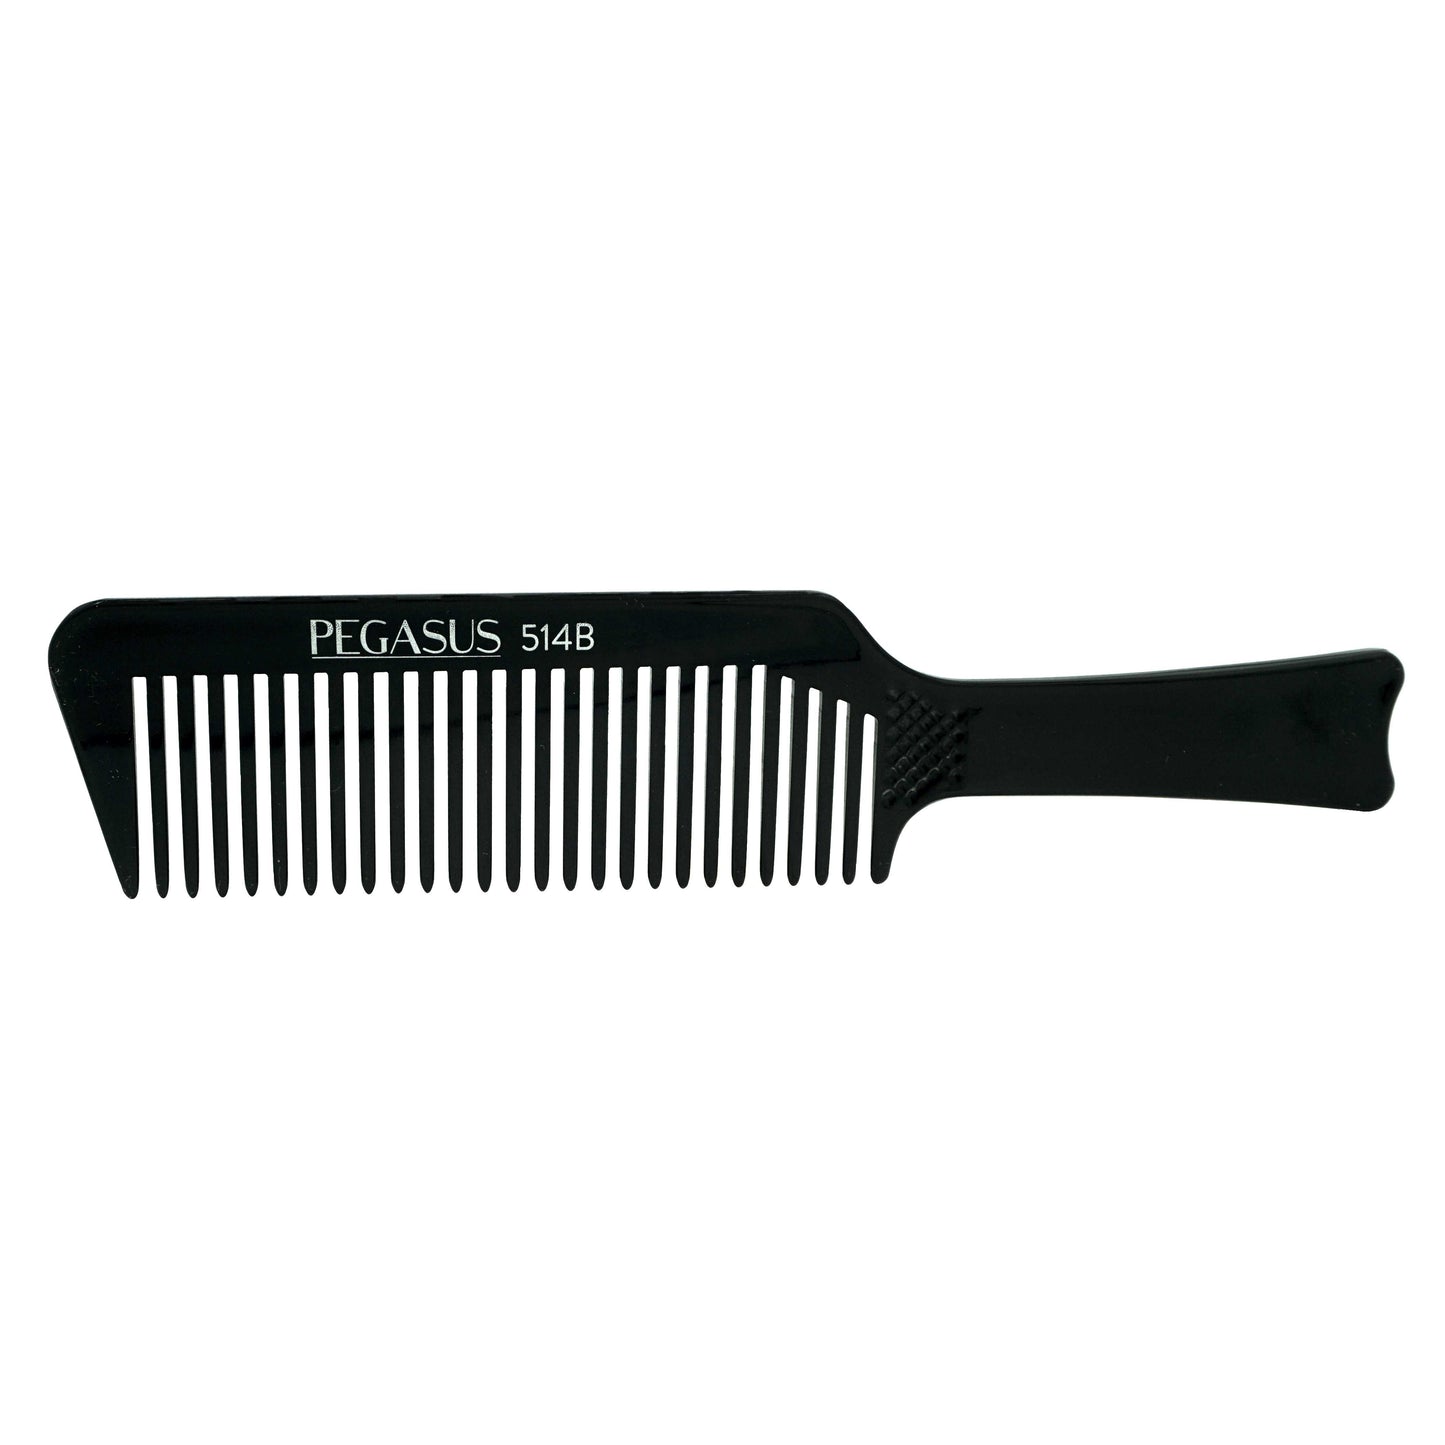 Pegasus 514B, 8.75in Hard Rubber Flattop Butch Comb, Handmade, Seamless, Smooth Edges, Anti Static, Heat and Chemically Resistant Comb | Peines de goma dura - Black